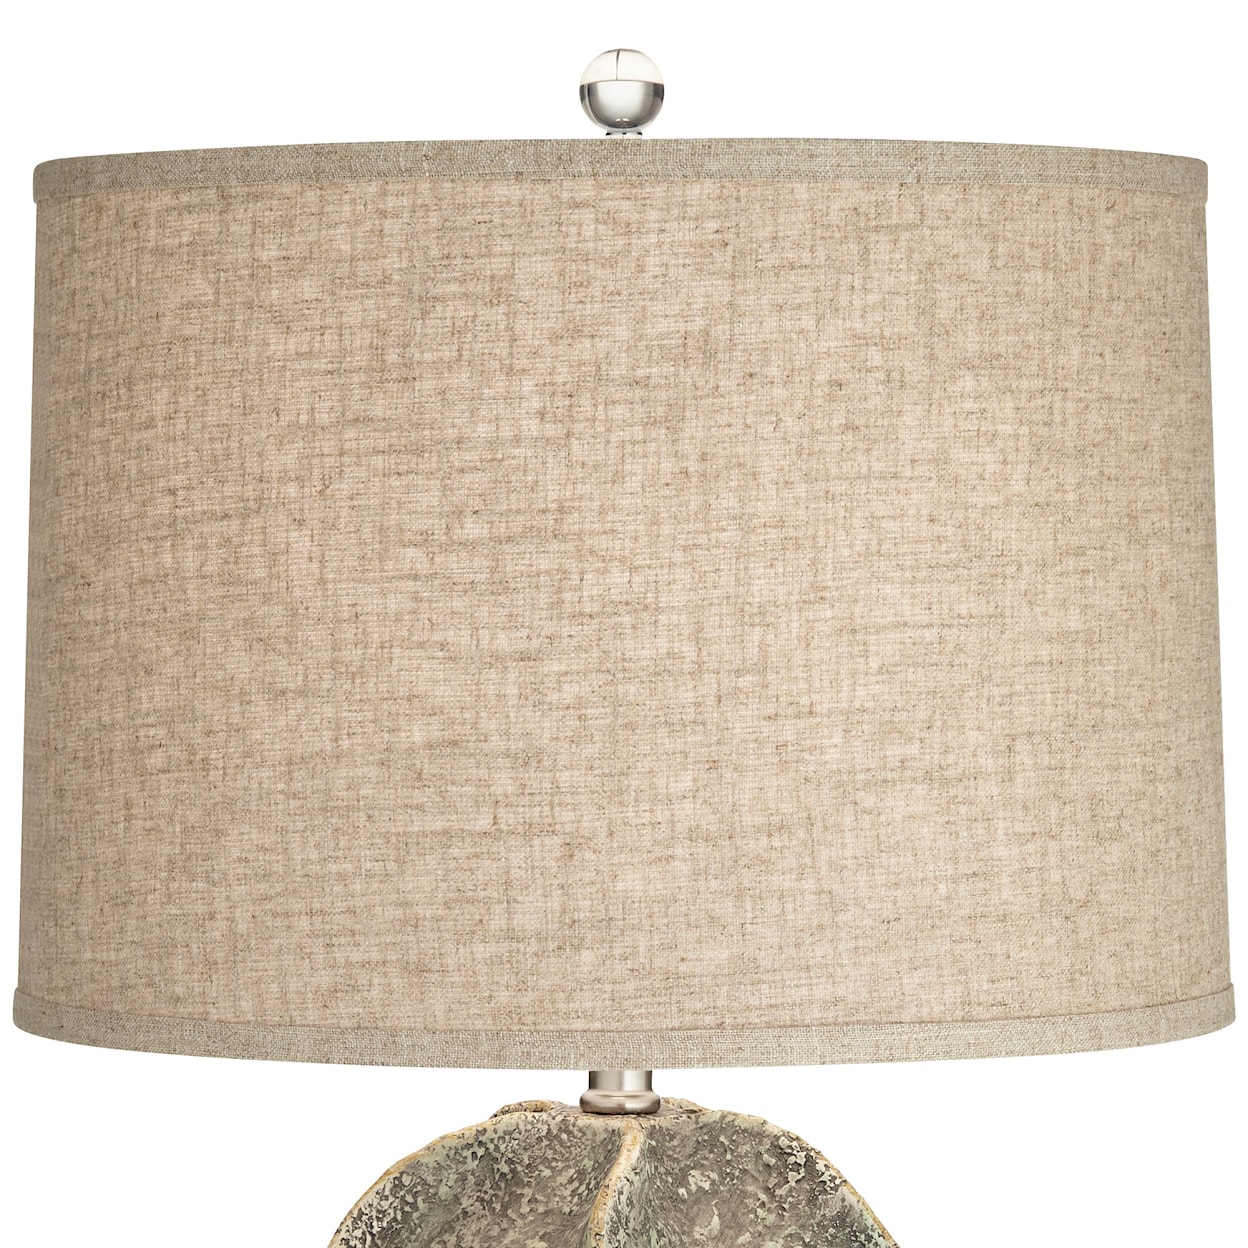 Pacific Coast Lighting Pacific Coast Lighting TL-Resin textured faux stone look